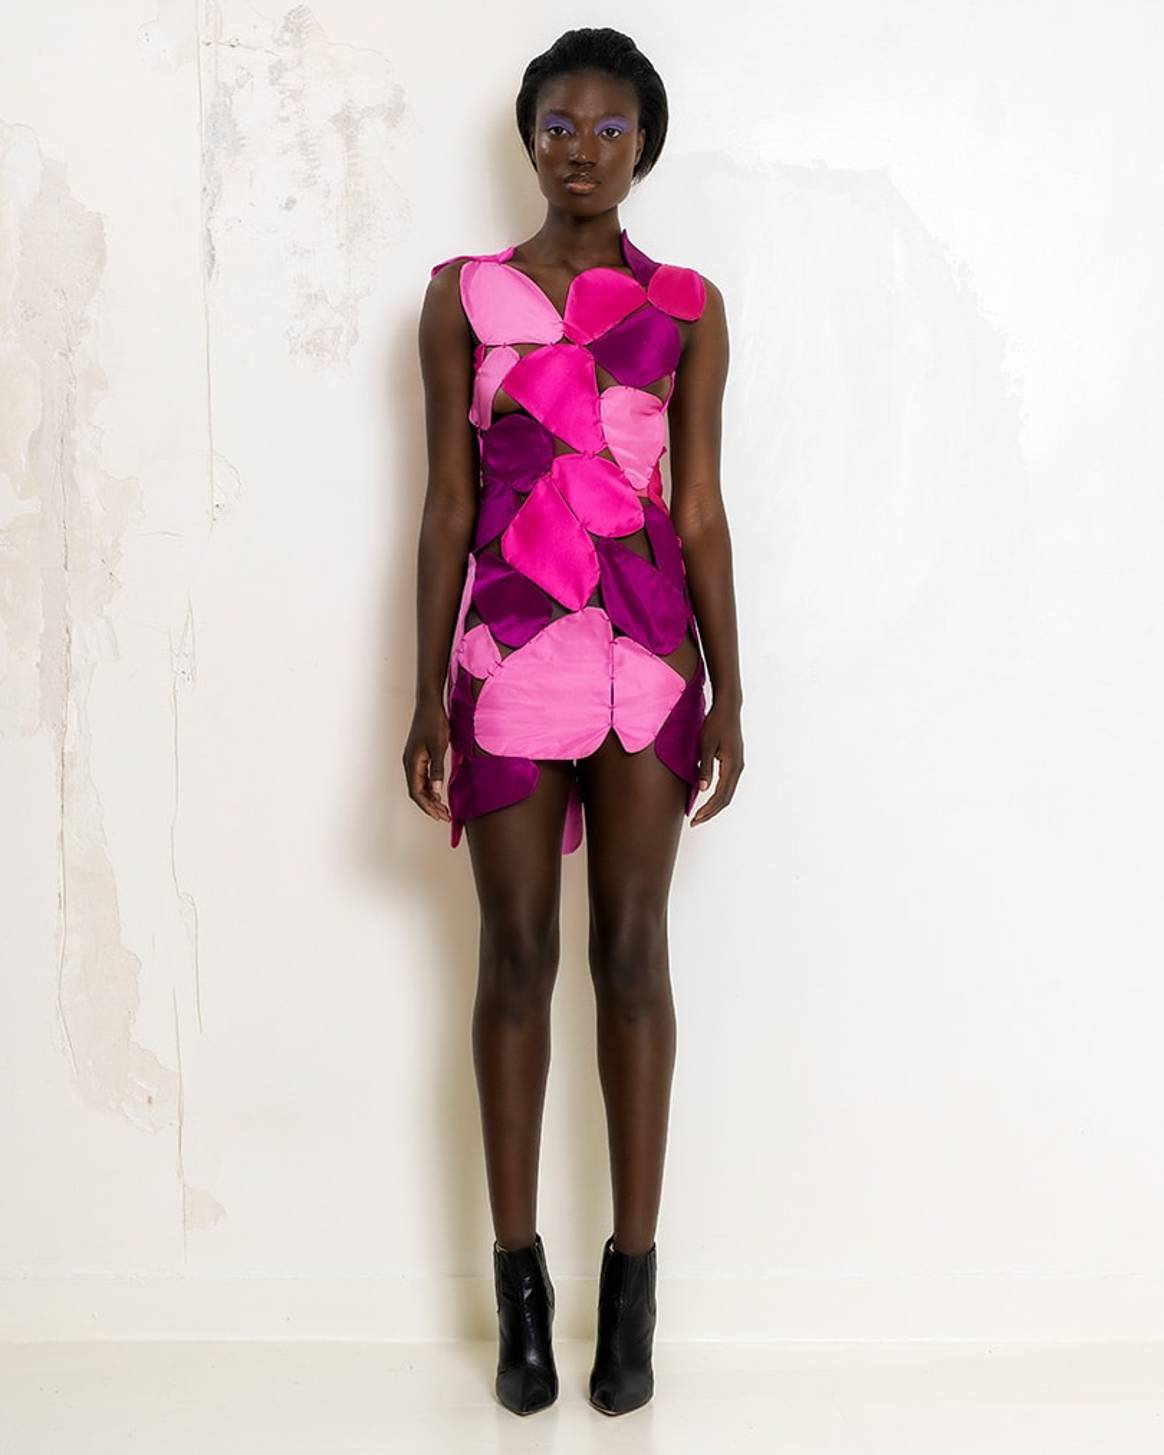 Imane Ayissi creates couture collection from scrap fabrics